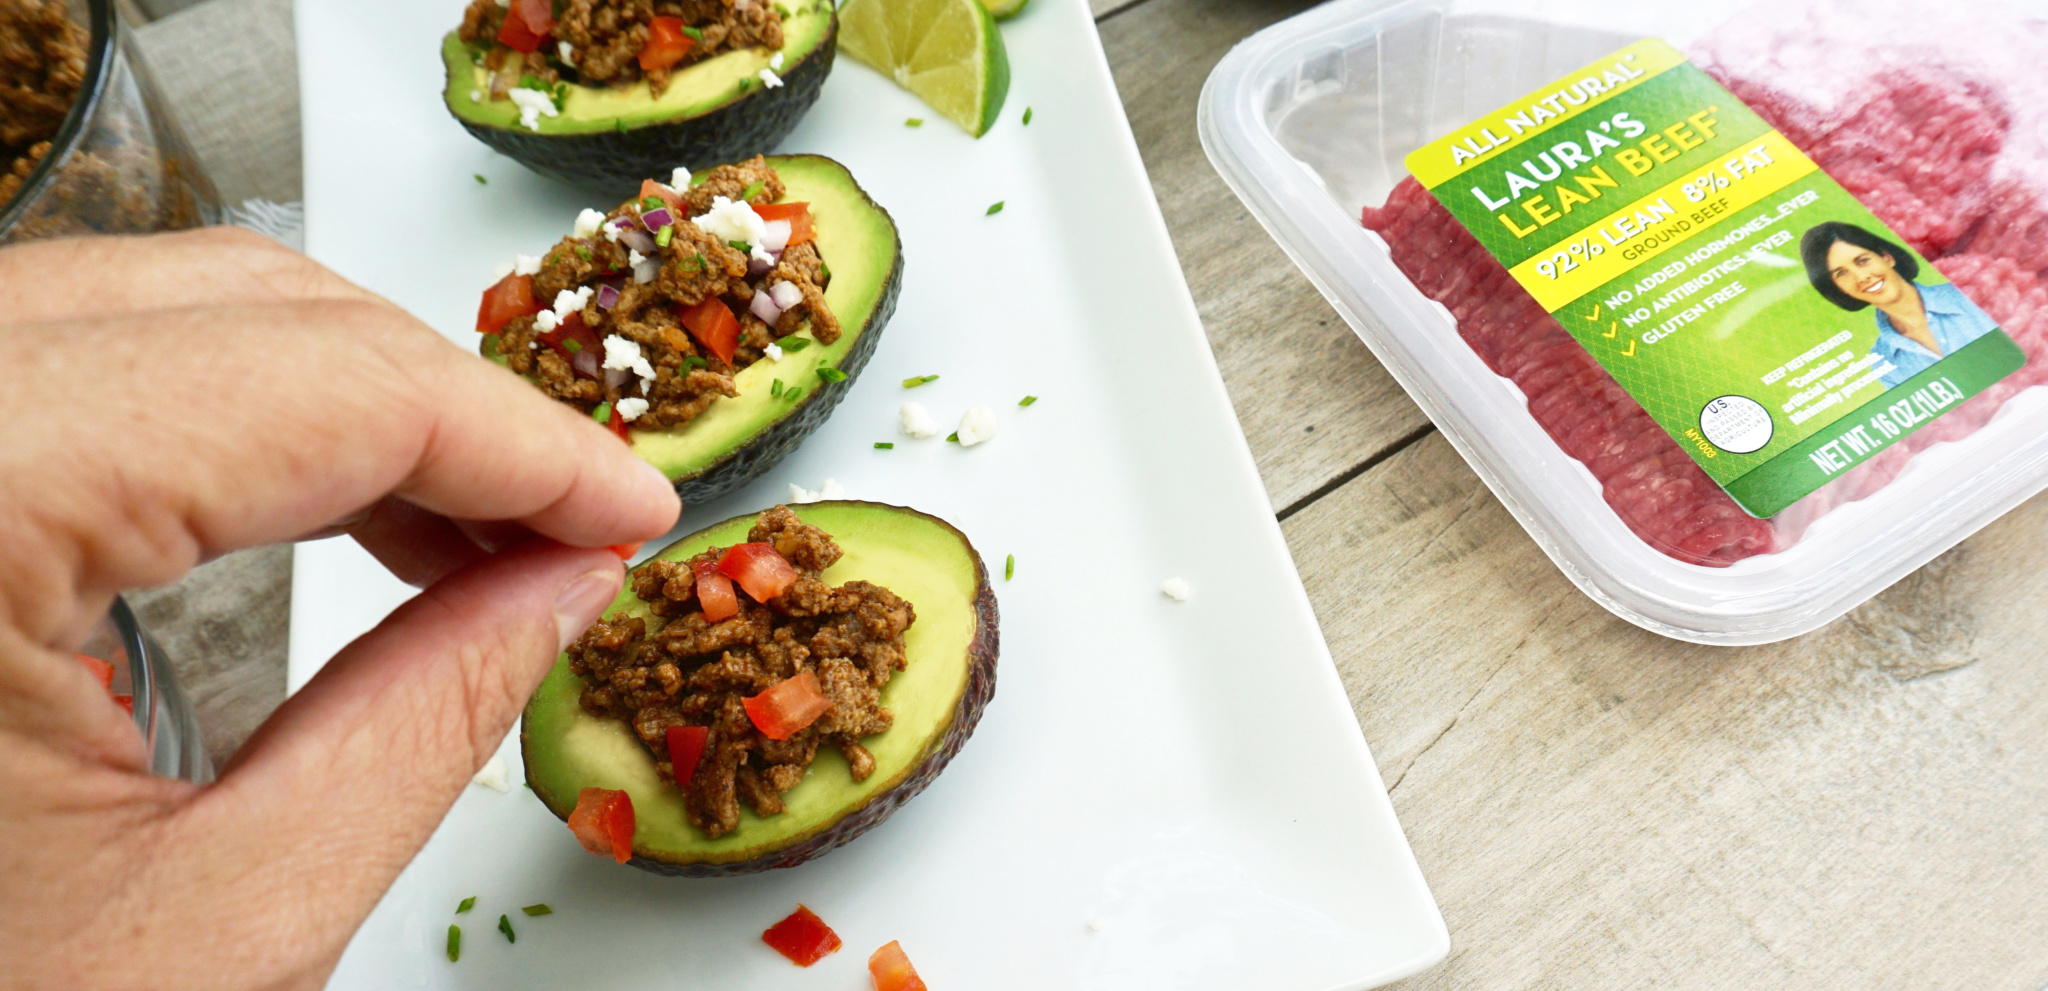 spicy chipotle taco stuffed avocados